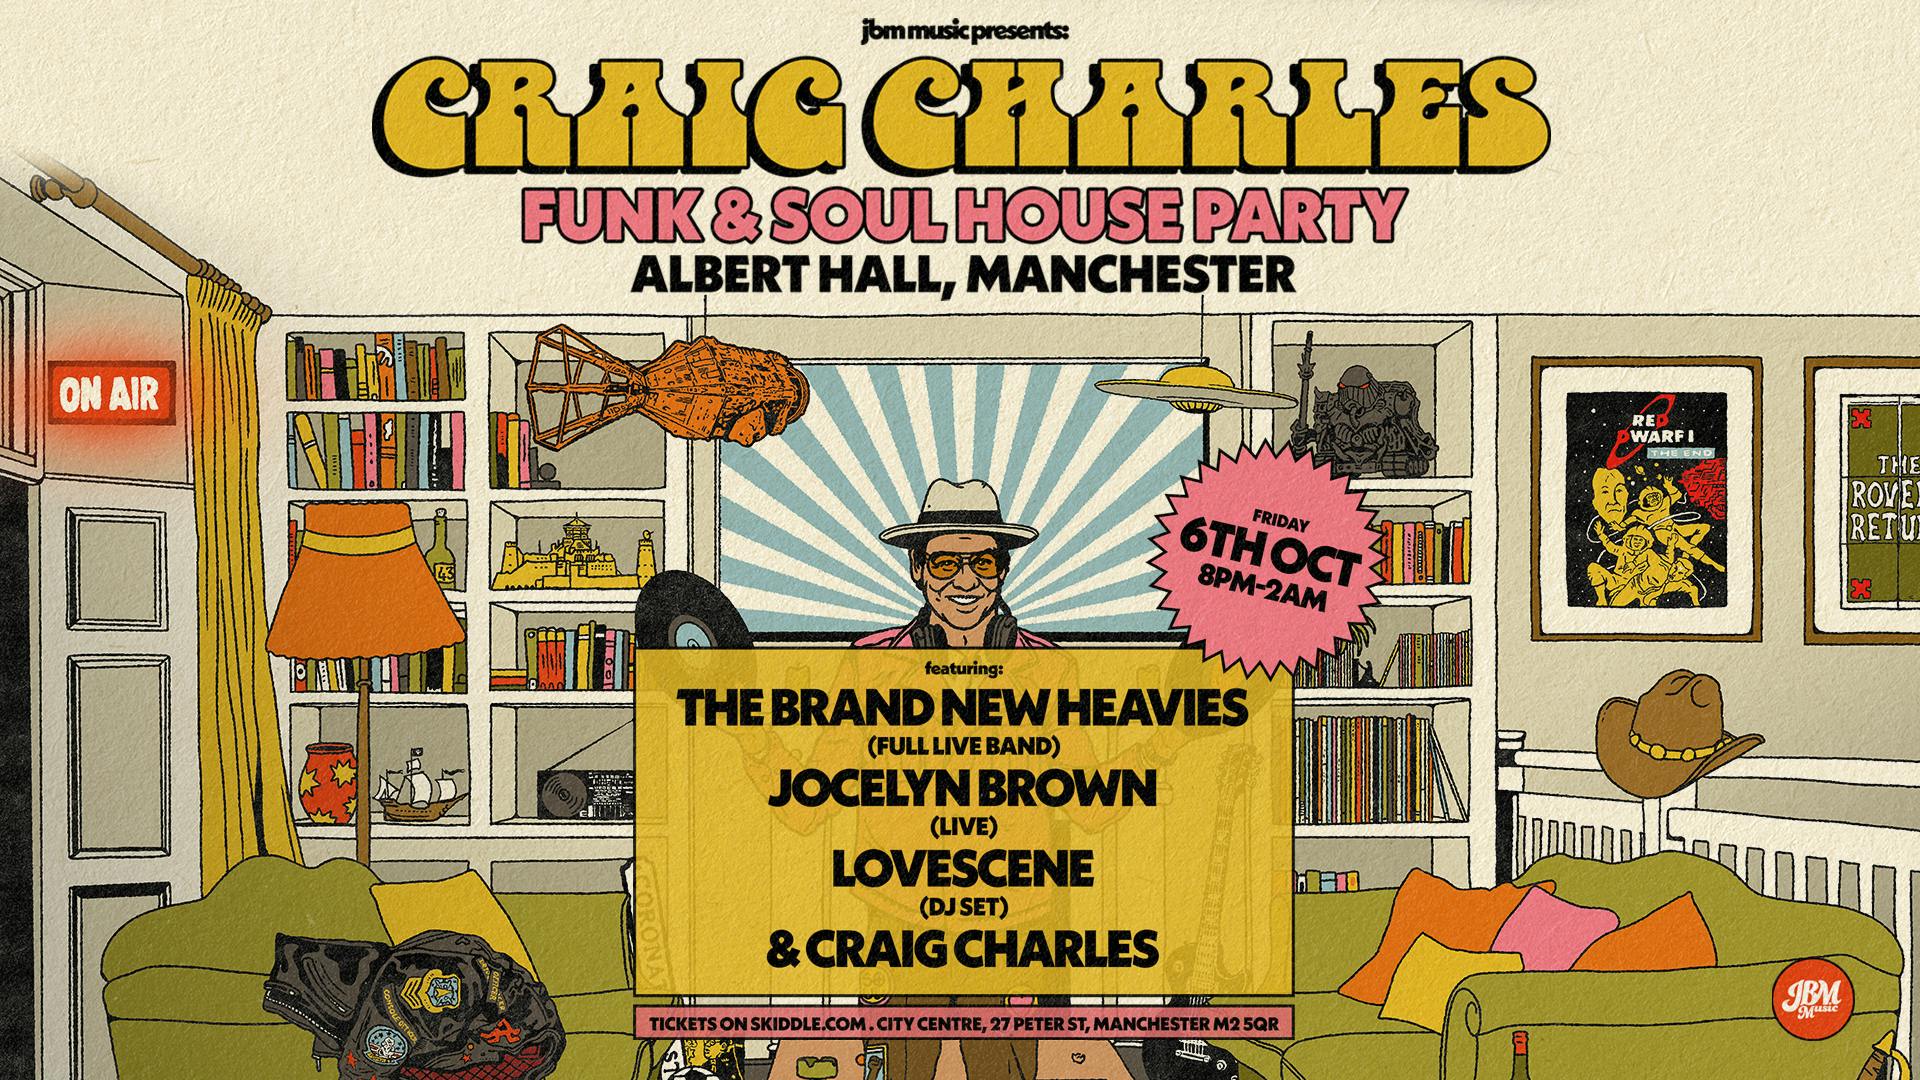 Craig Charles Funk + Soul House Party: The Brand New Heavies, Jocelyn Brown, Lovescene + Craig Charles (SOLD OUT)